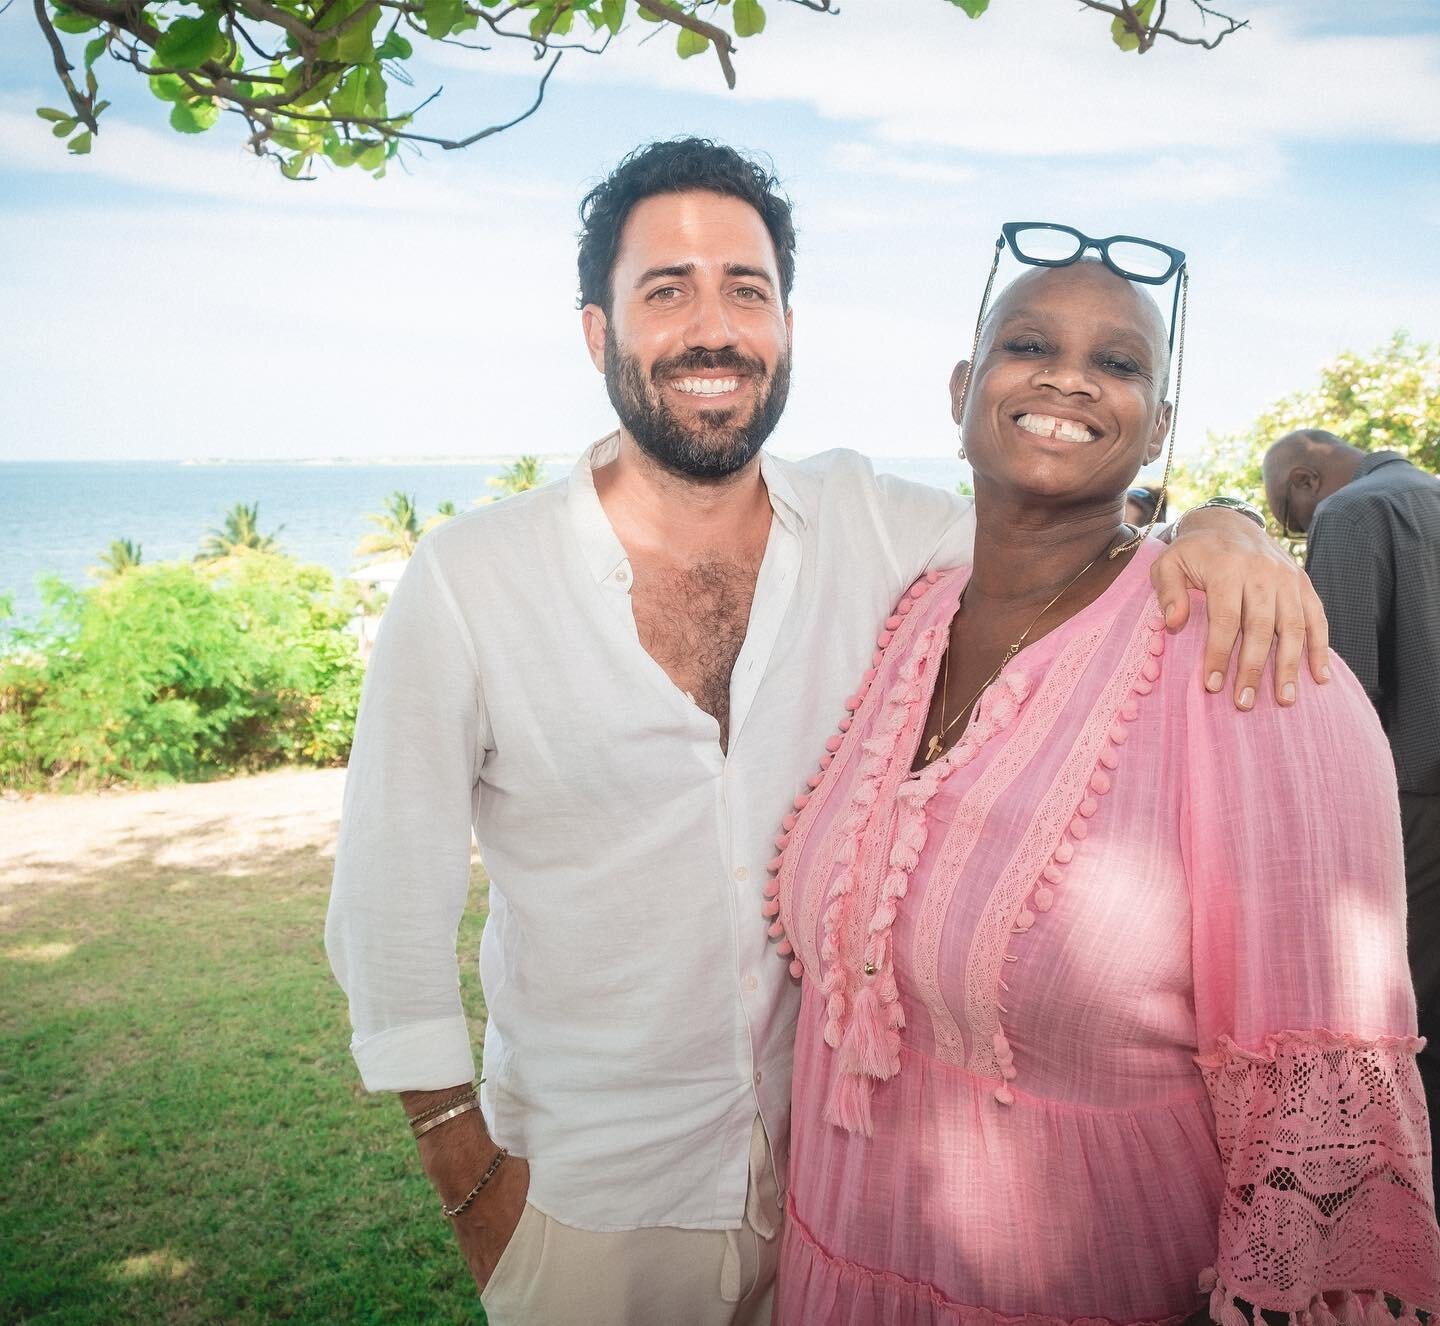 So fun catching up with chef @andioliver earlier this week at the Restaurant Week Food Forum at the Antigua &amp; Barbuda Hospitality Training Institute.

Go check out her new book &ldquo;The Pepperpot Diaries: Stories From My Caribbean Table&rdquo;.